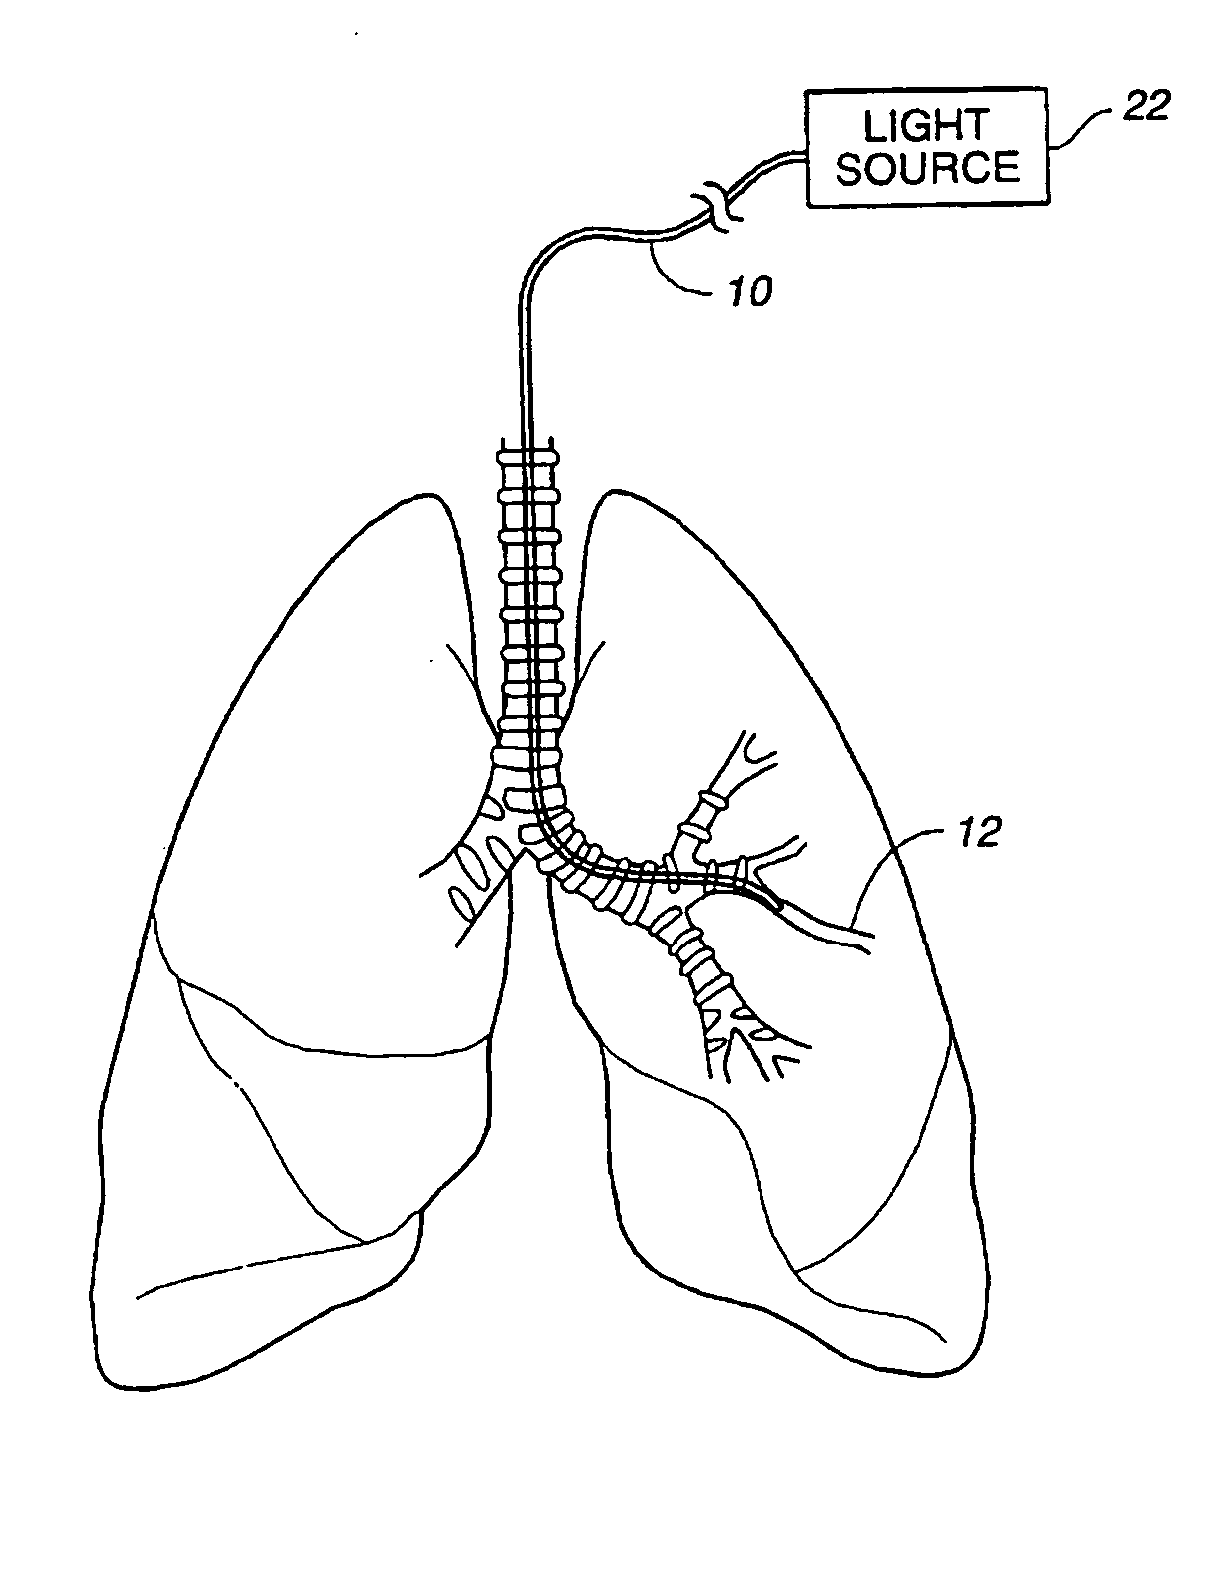 Method of treating airways in the lung